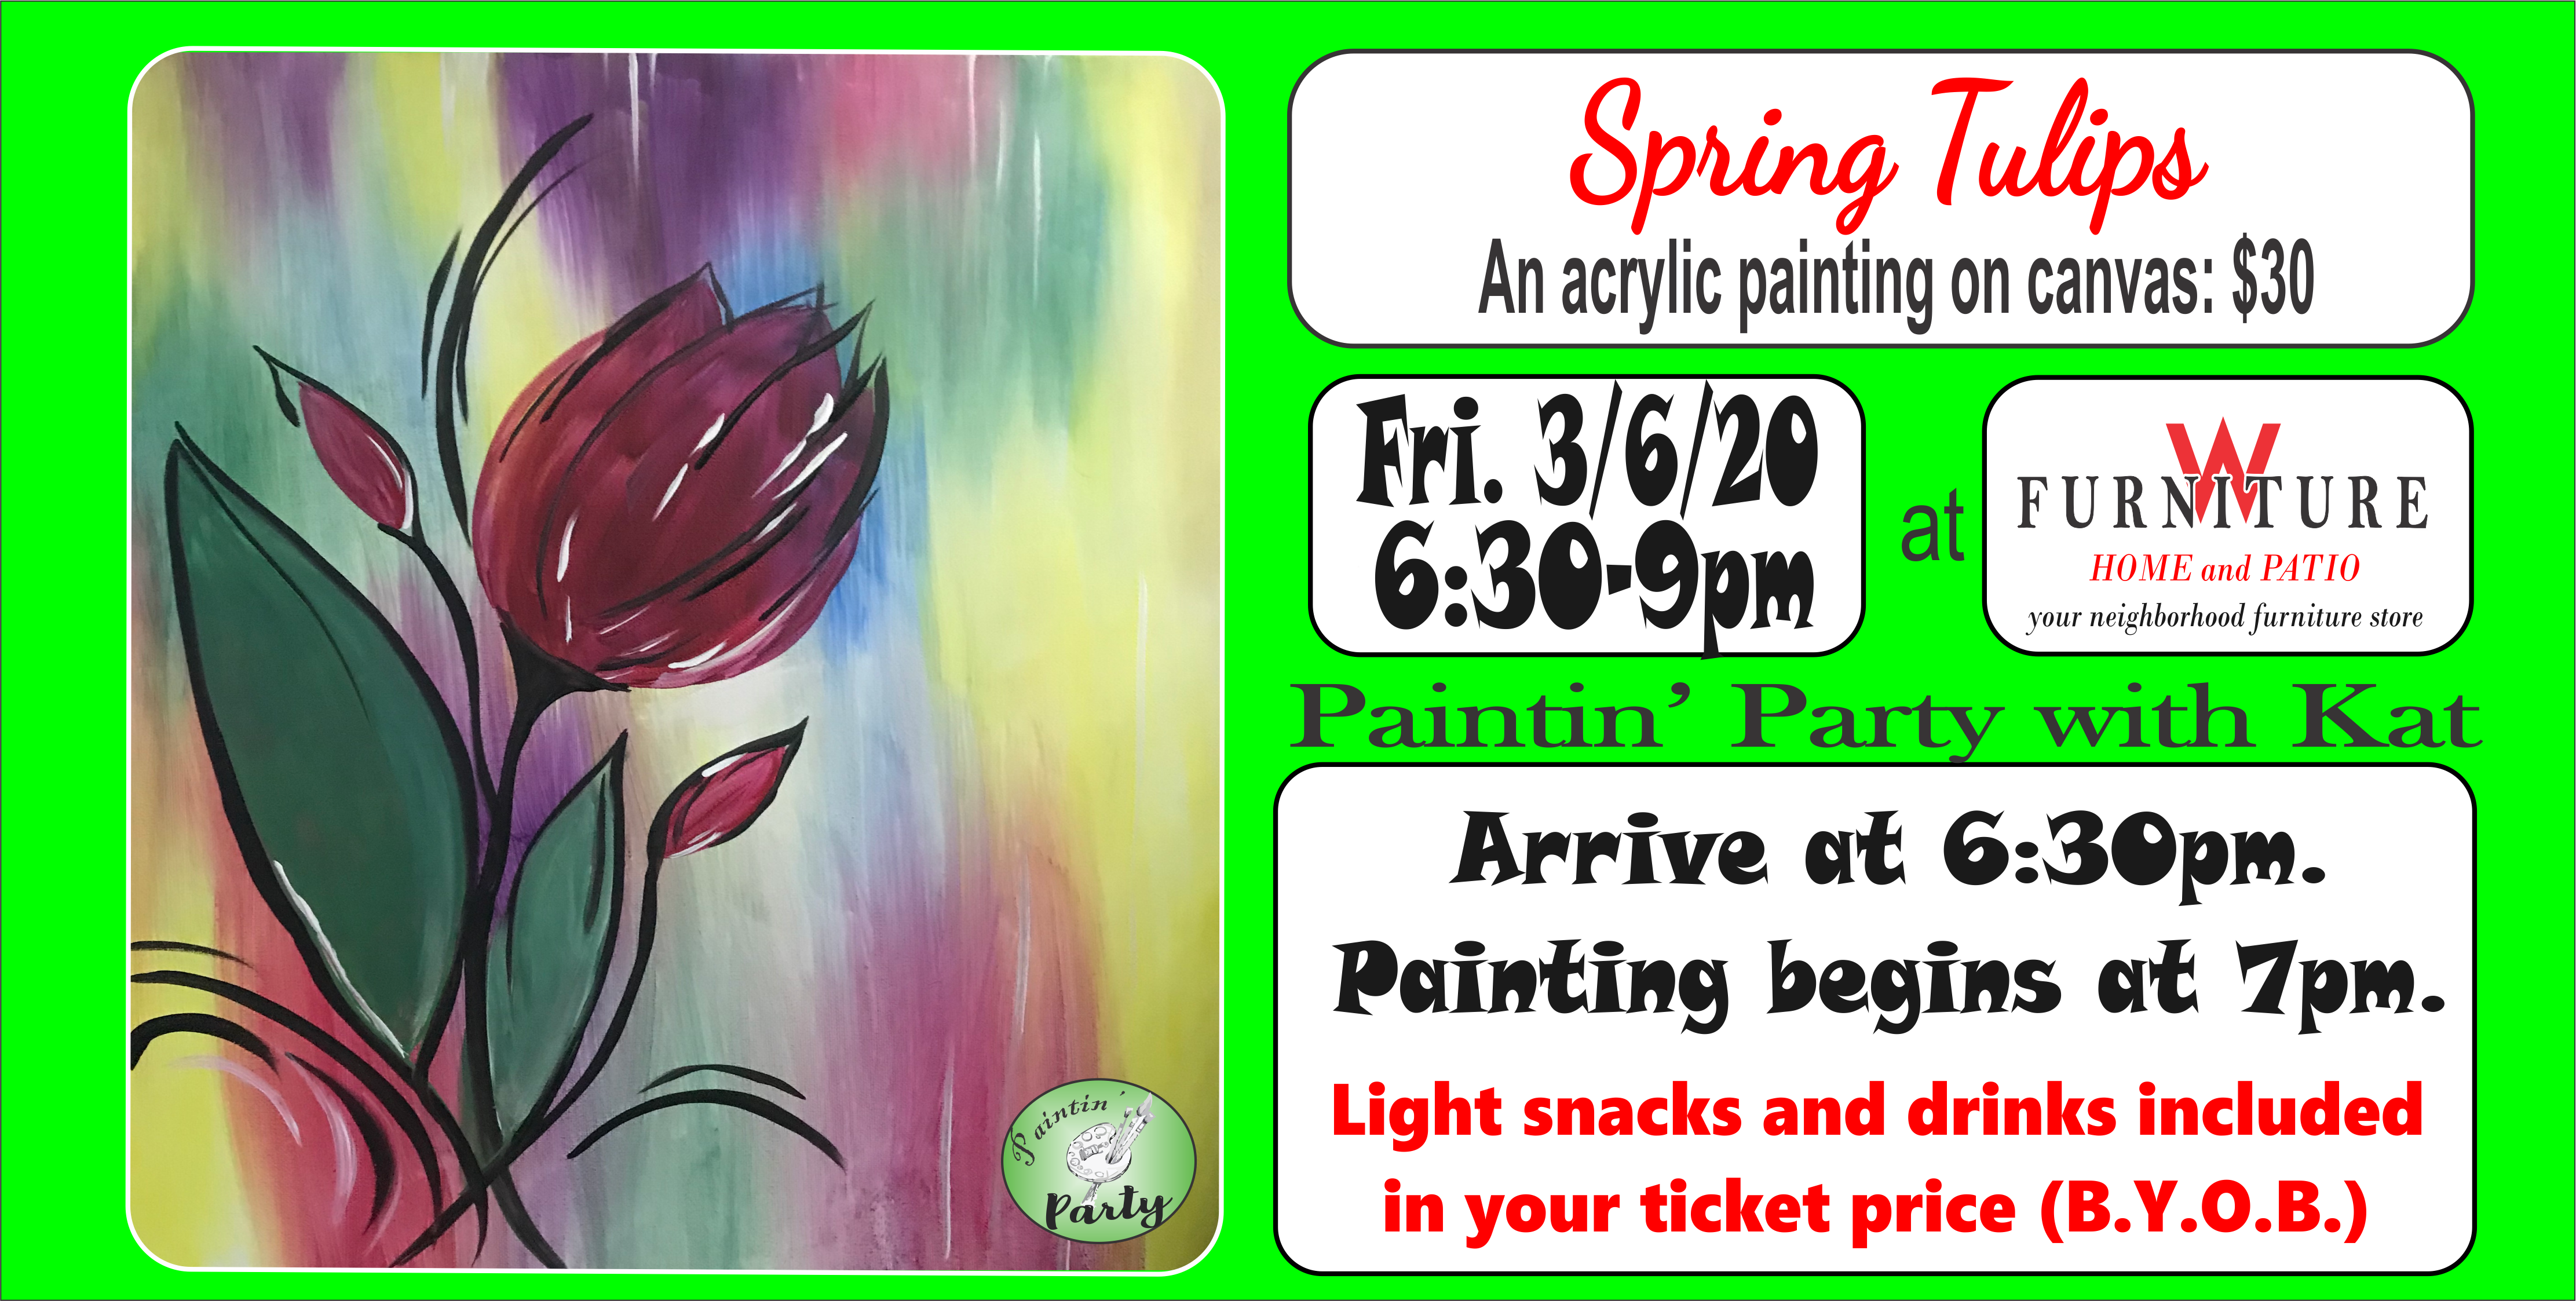 PAINTIN' PARTY with KAT: Spring Tulips (ACRYLIC PAINTING on CANVAS)